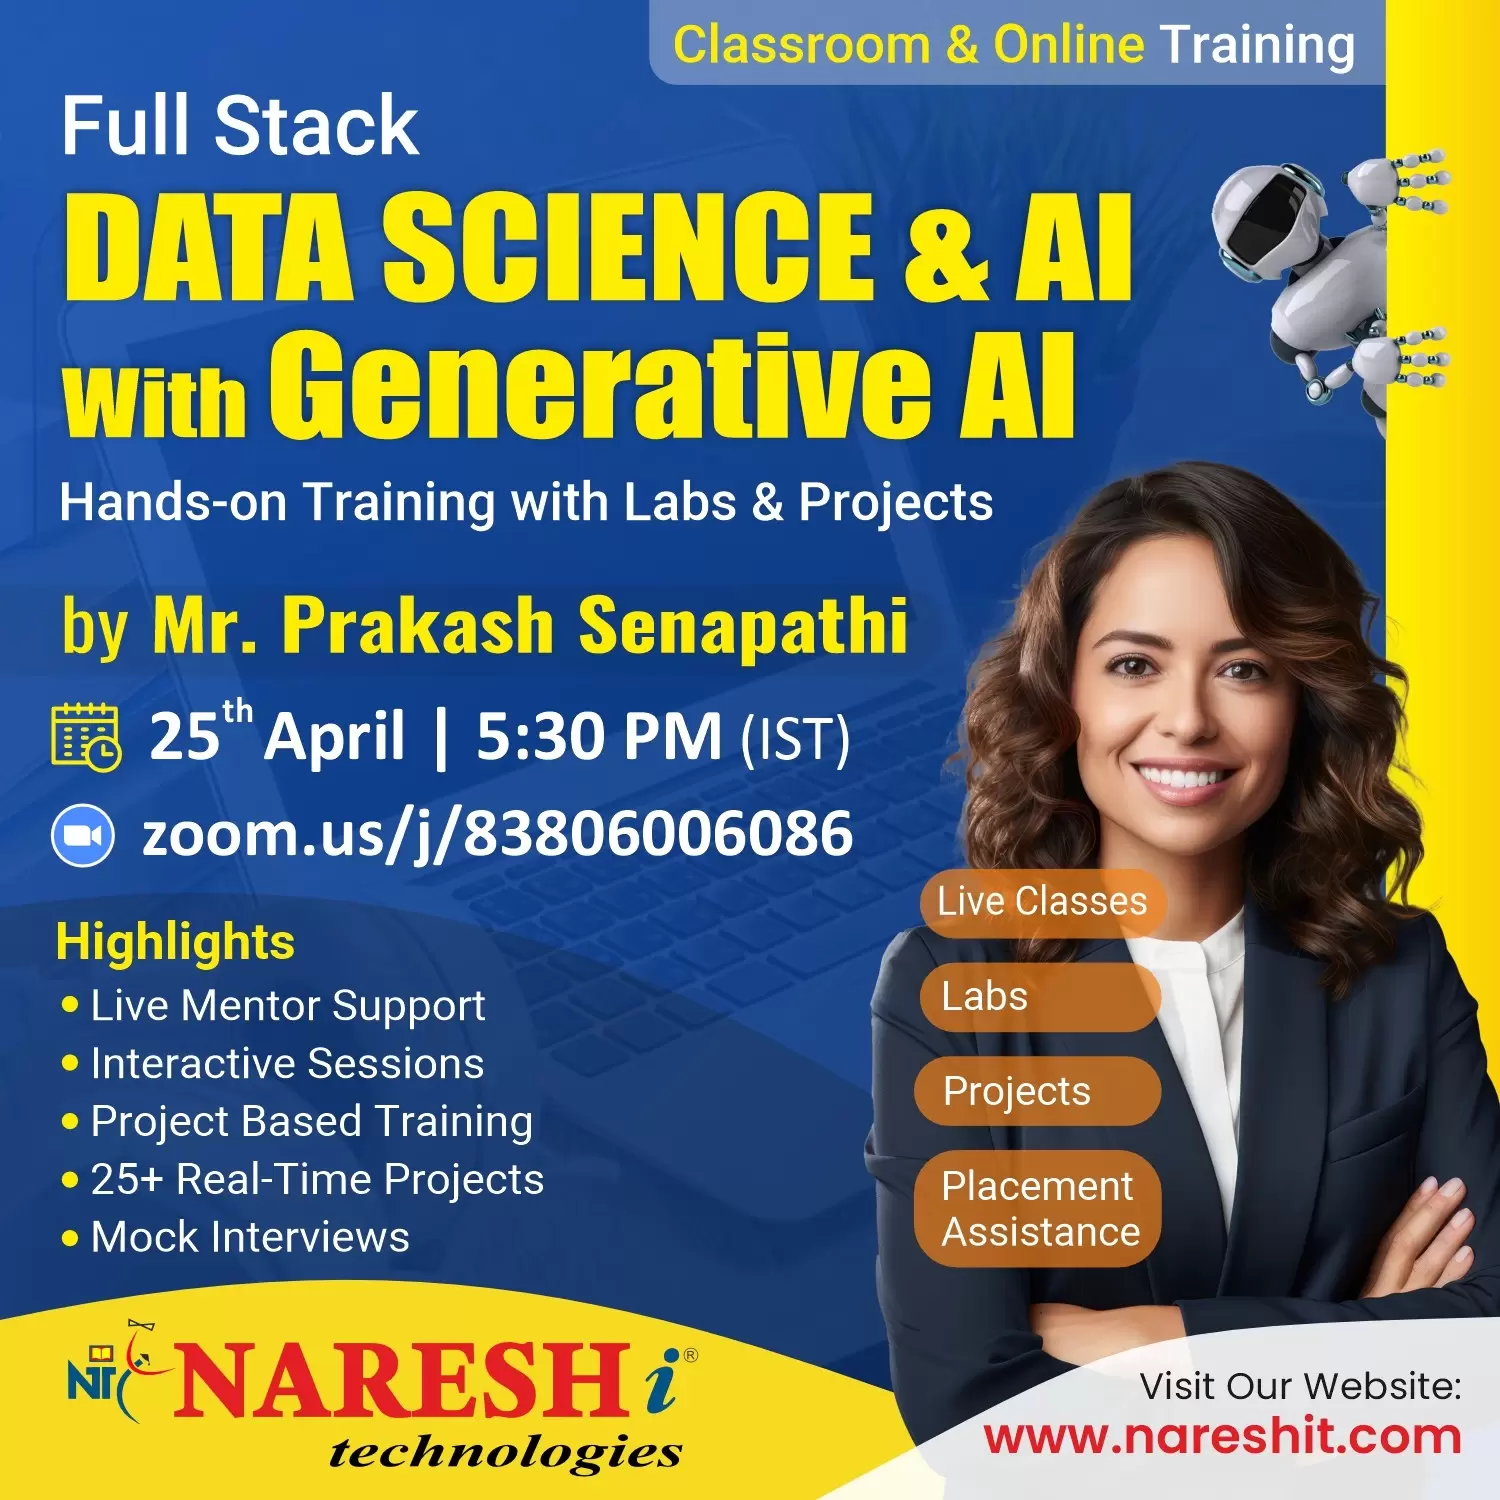 DATA SCIENCE & AI ONLINE TRAINING IN NARESHIT